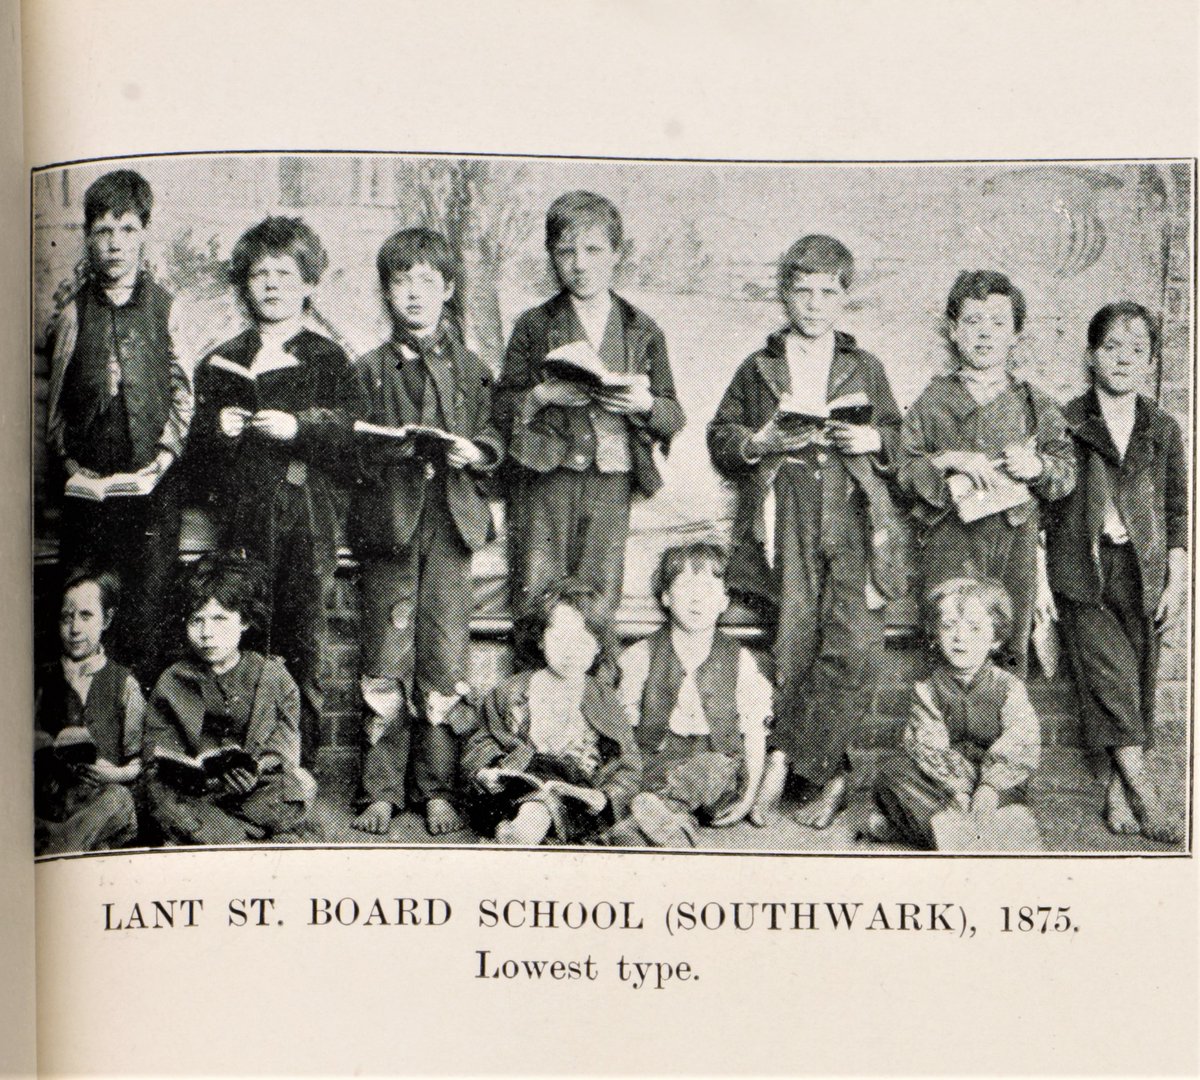 Been researching theories of ‘urban degeneration’ and found these pics. Children at the Lant St School, Southwark, photographed in 1875. Described in 1904/5 as the ‘lowest type' by a govt committee set up to explore alleged inherited physical and mental decline, ie  #eugenics¼